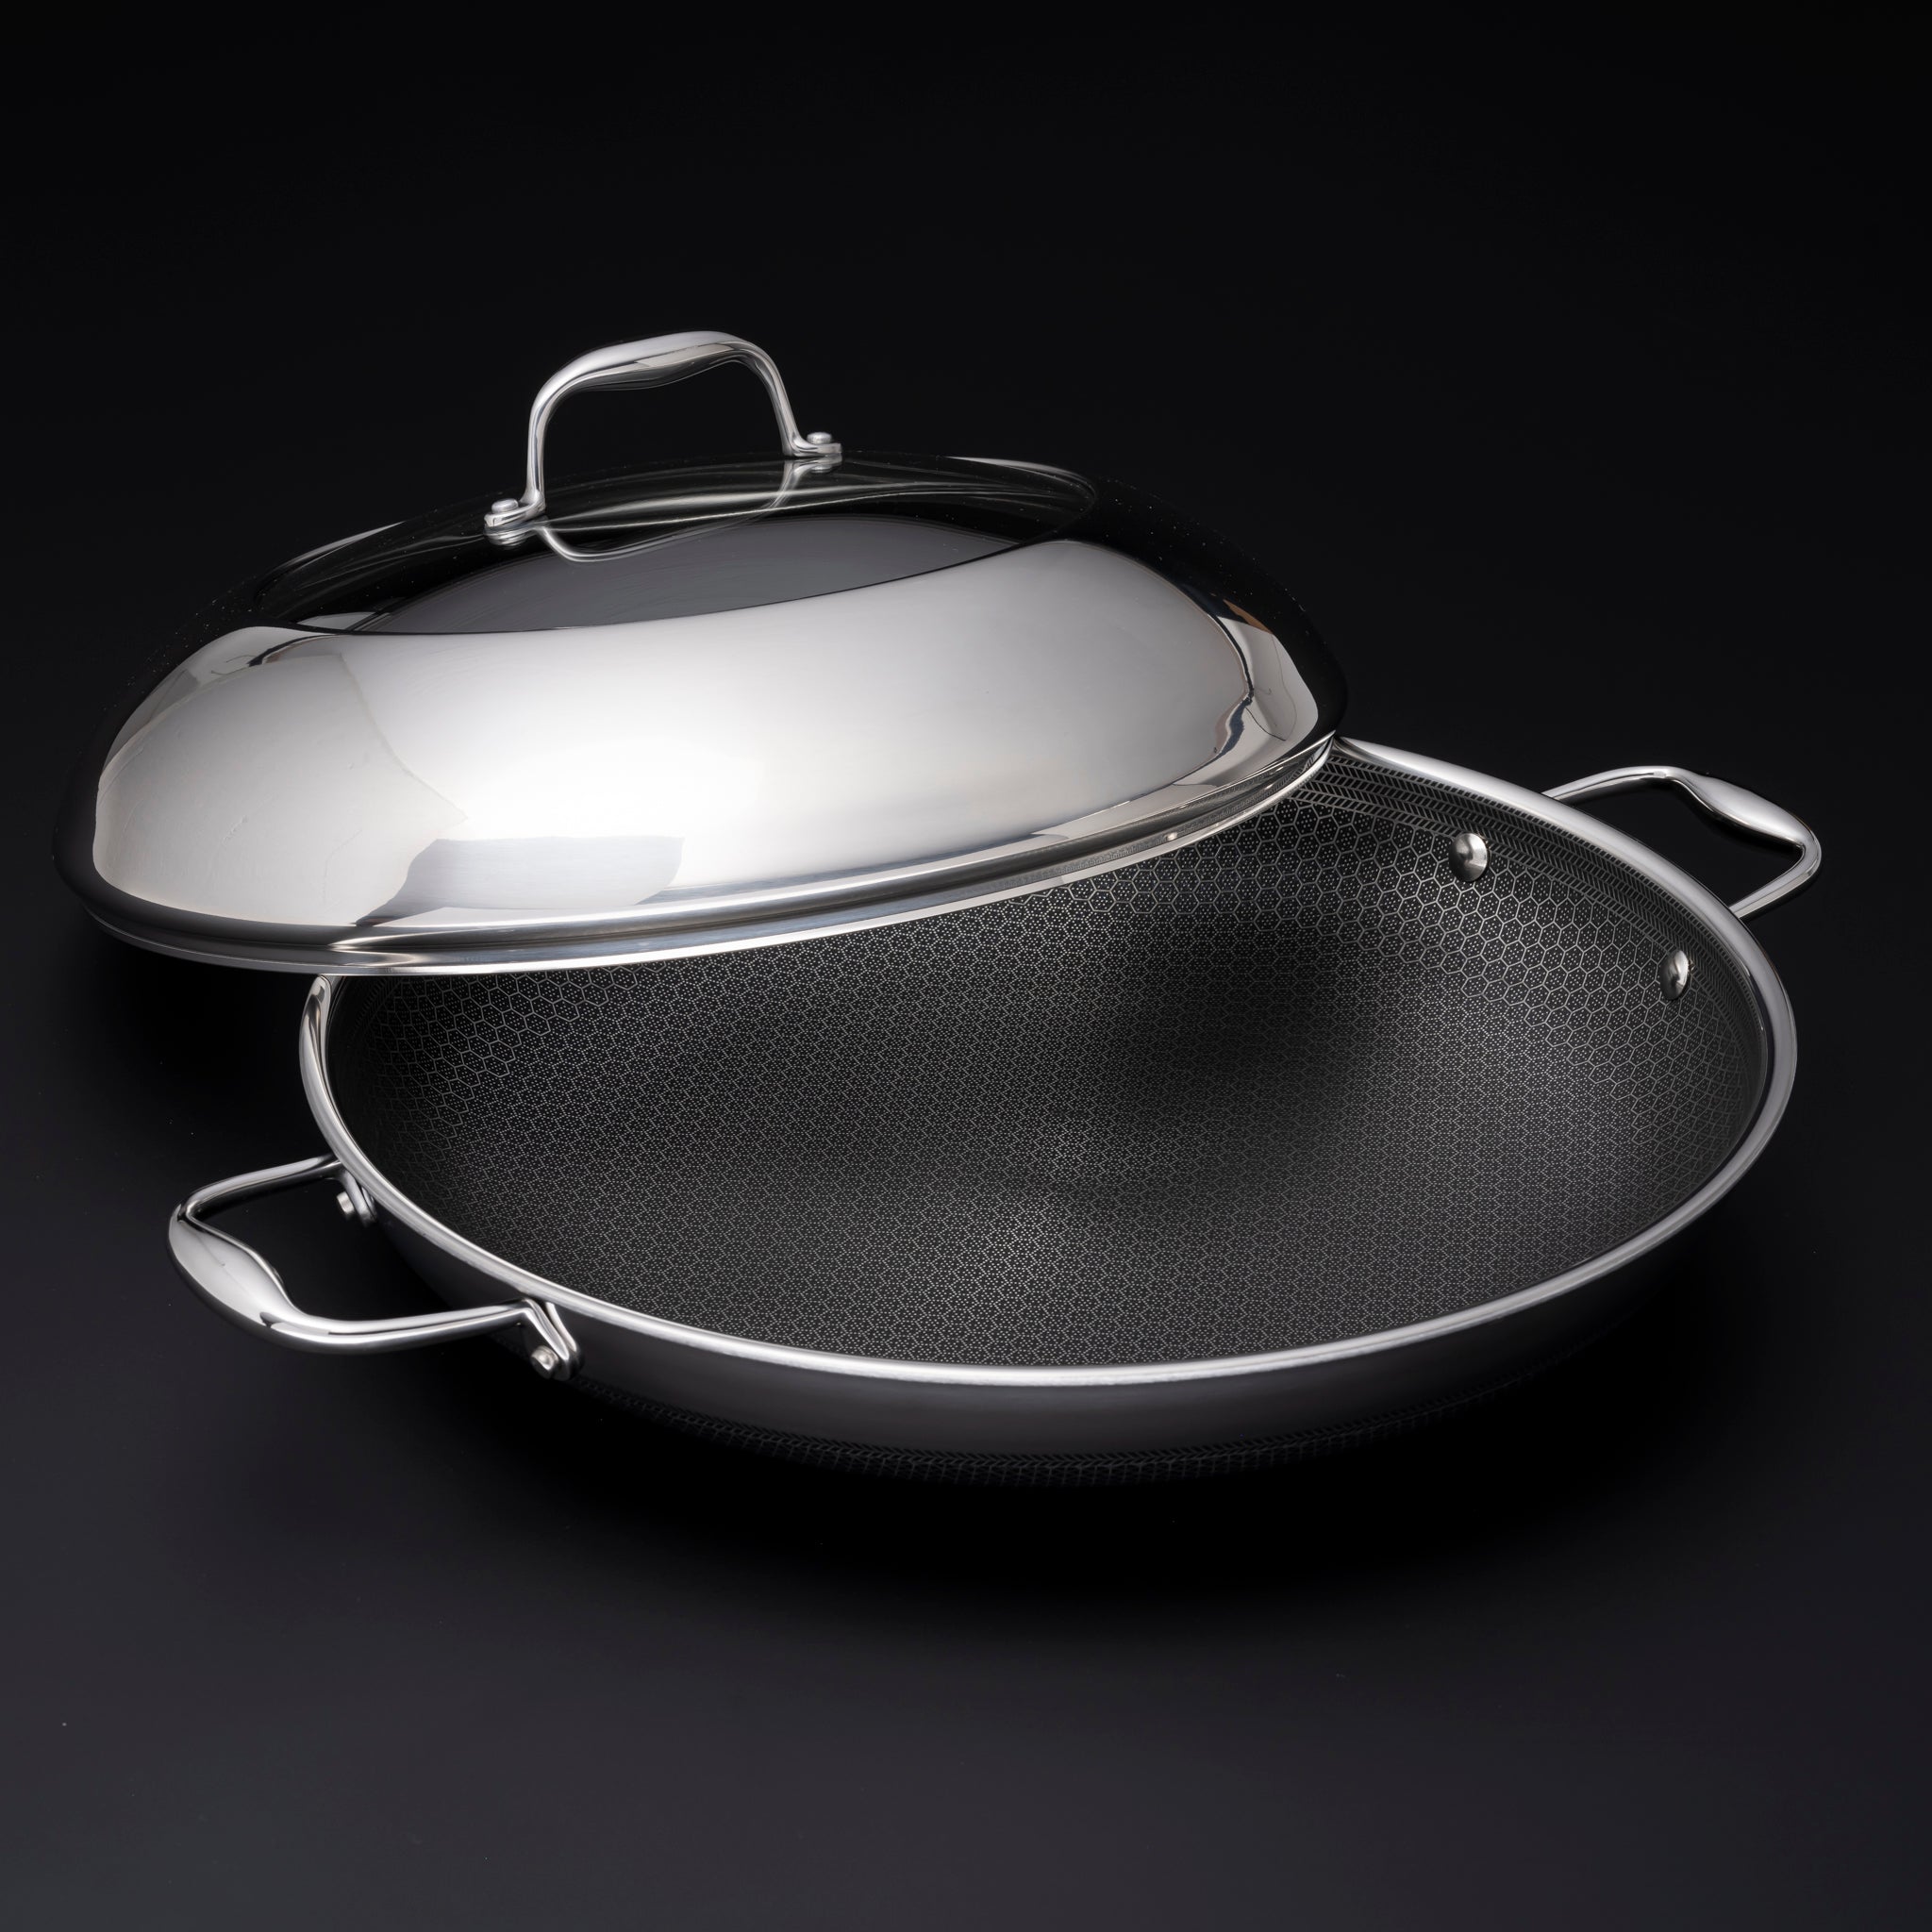 Image of HexClad 14 Inch Hybrid Stainless Steel Frying Pan with Lid